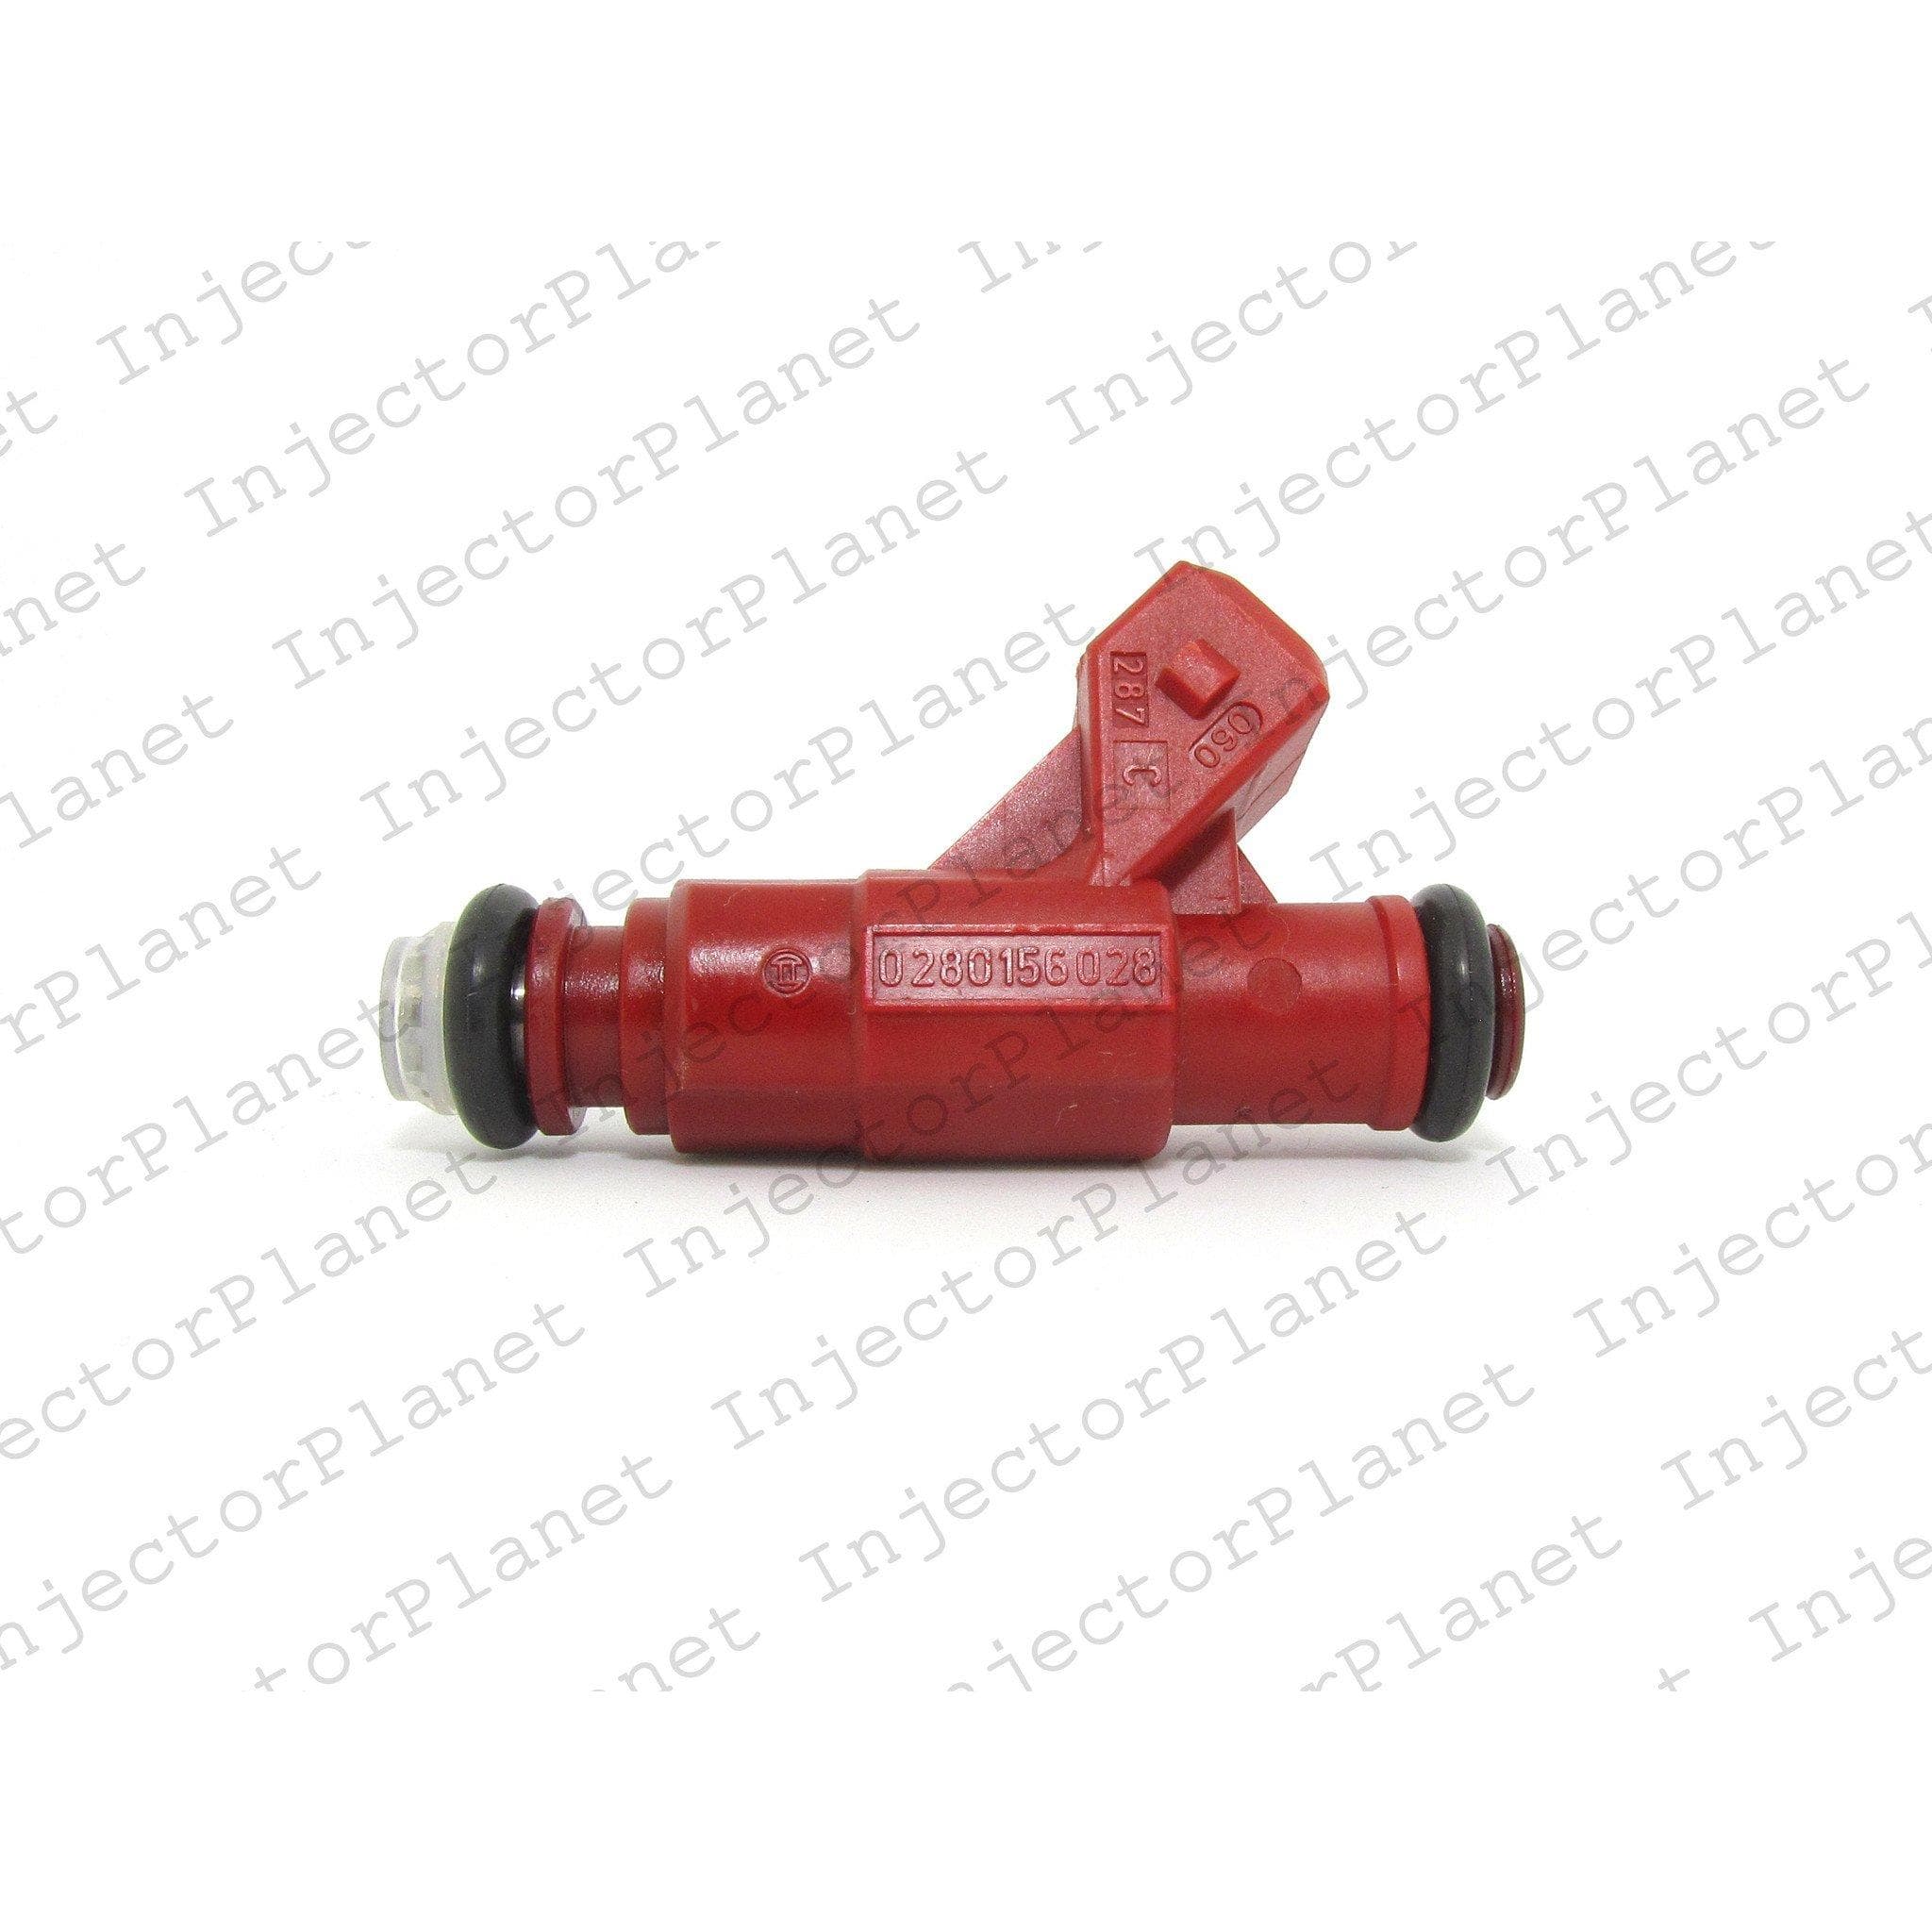 Bosch 0280156028 / Ford 1L2E-C5A | INJECTOR PLANET CORP.